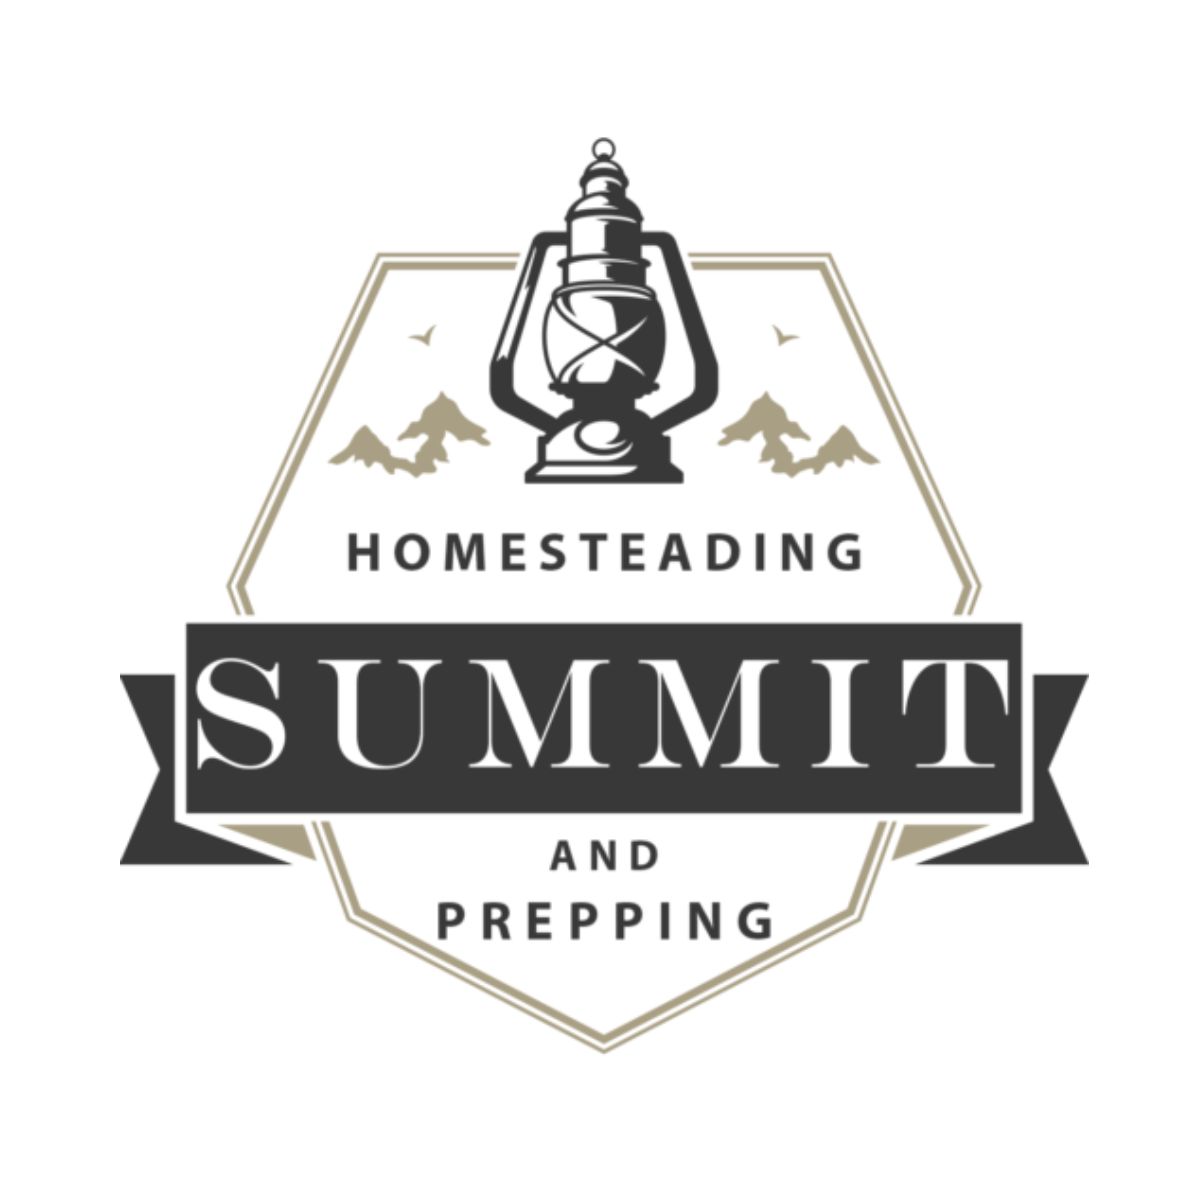 Homesteading and Prepping Summit